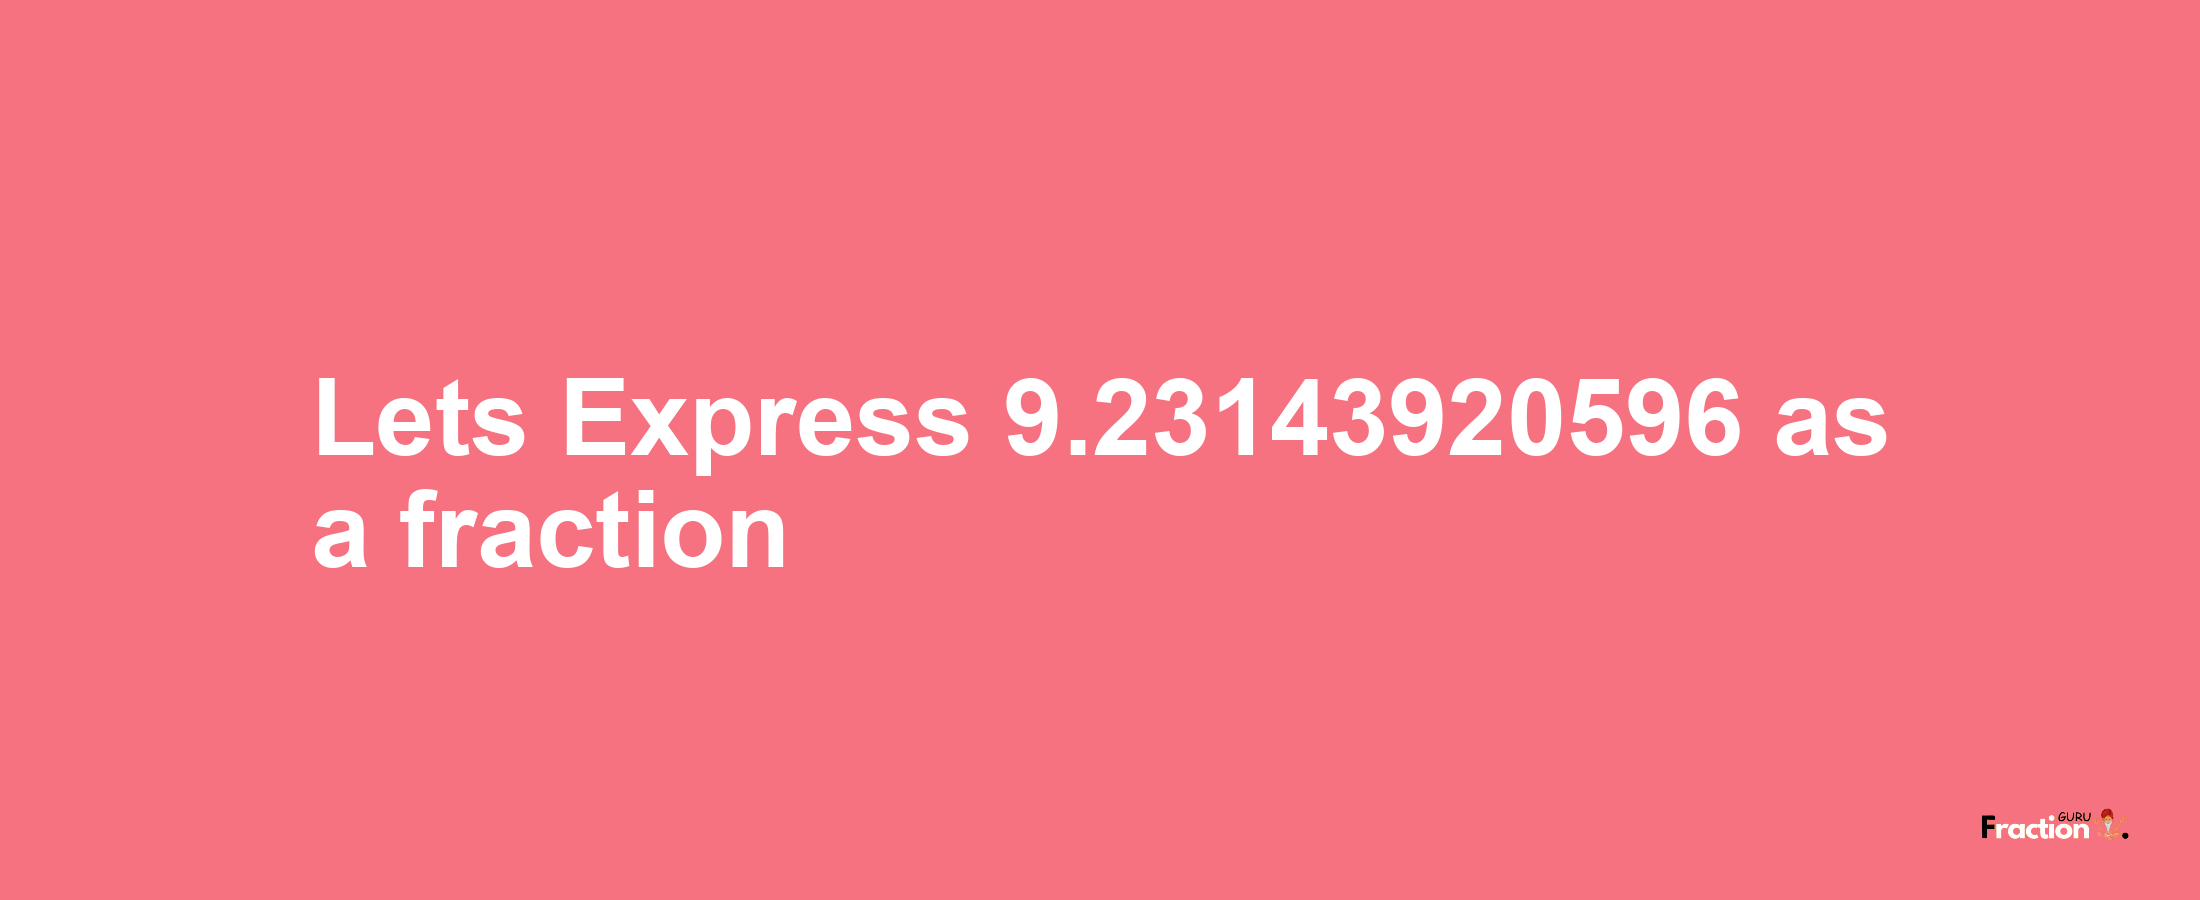 Lets Express 9.23143920596 as afraction